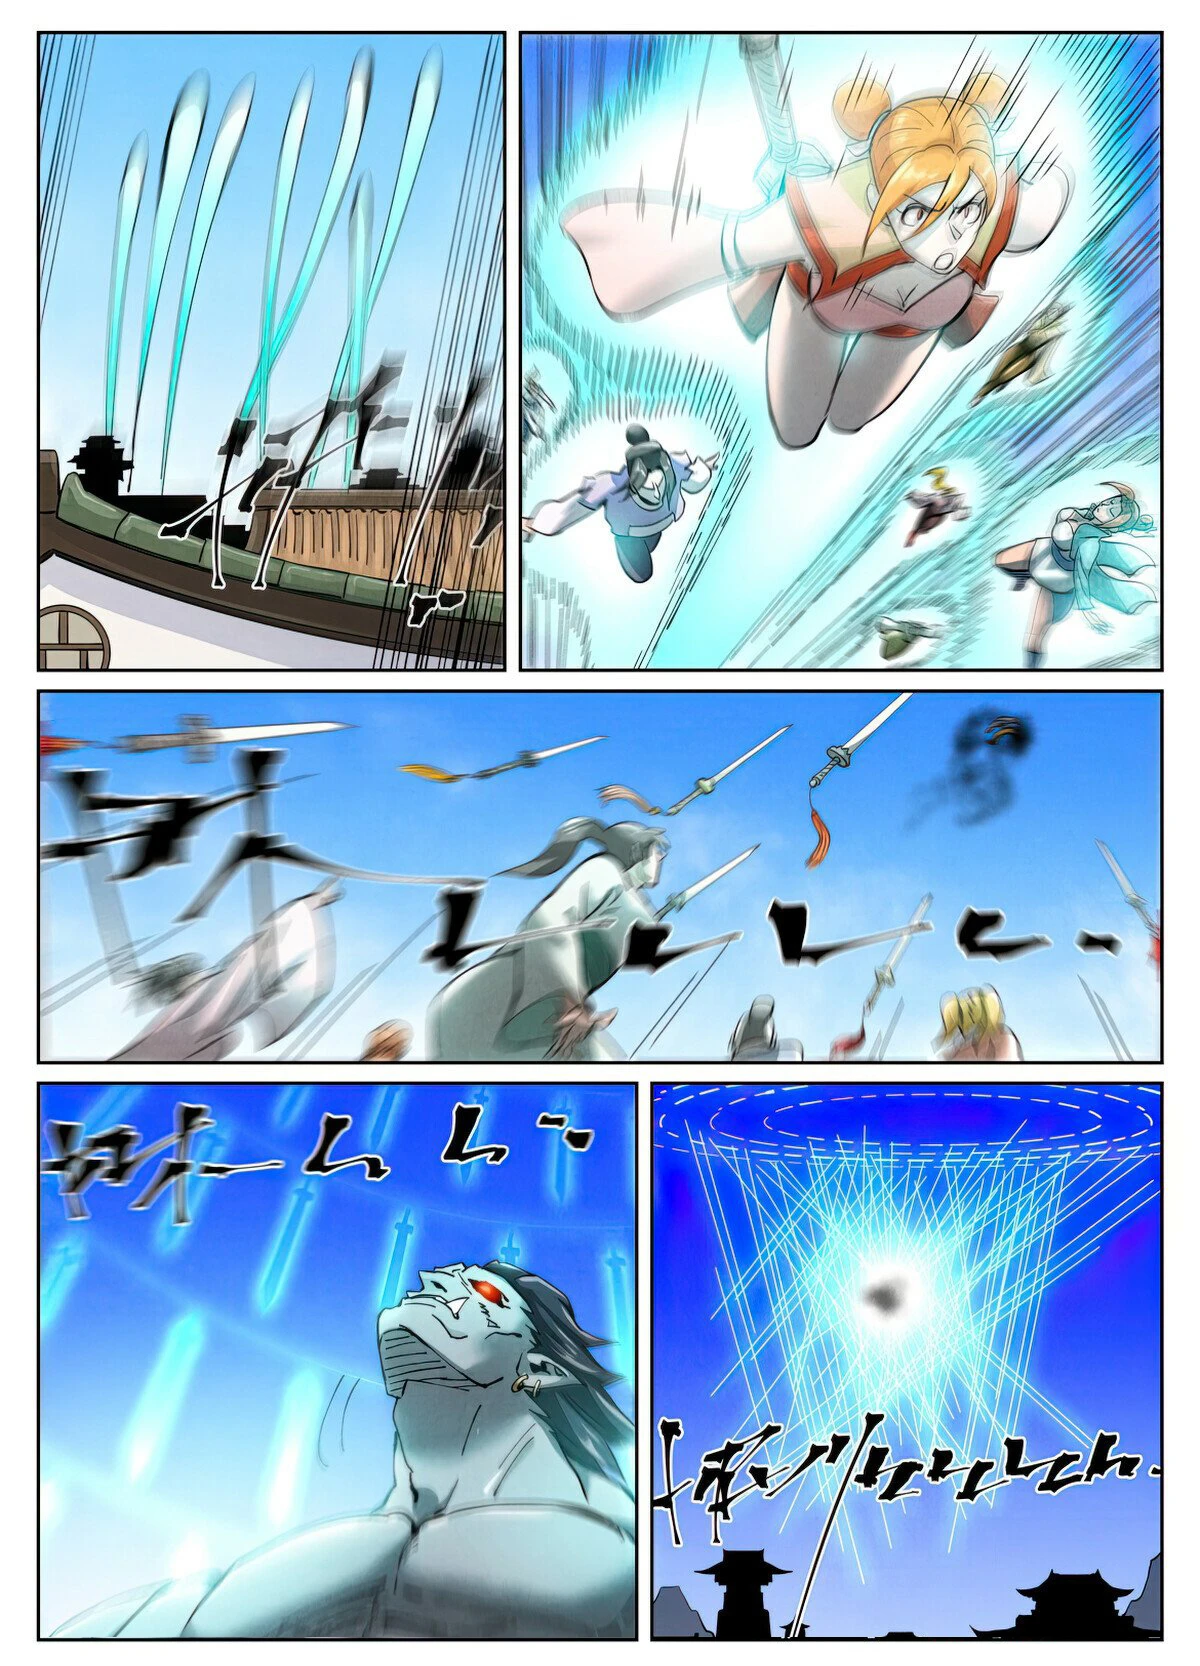 Tales of Demons and Gods Manhua - chapter 438.1 - #4